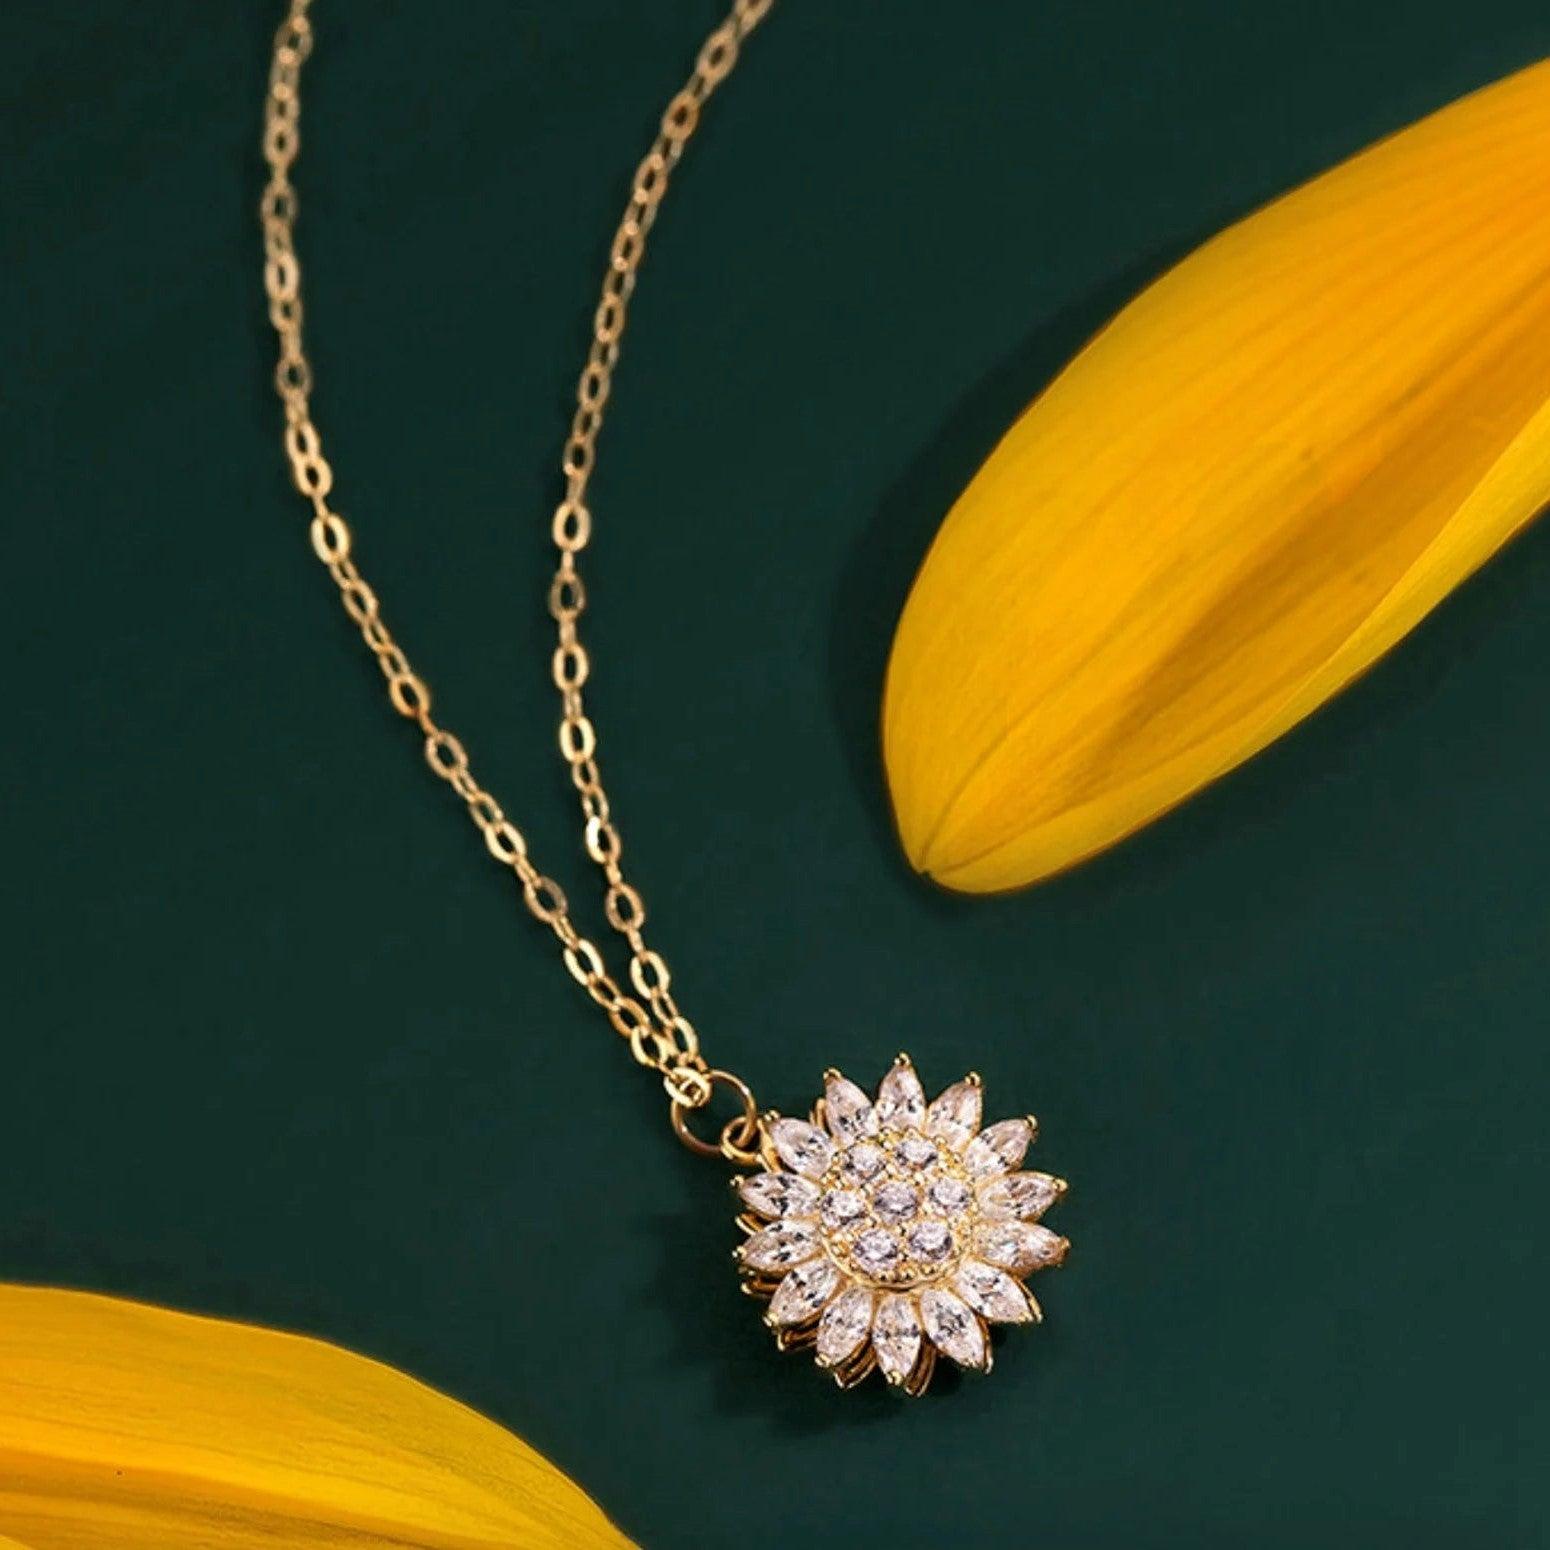 (NEW) Adopt a Queen - Spinning Sunflower Necklace - The Project Honey Bees